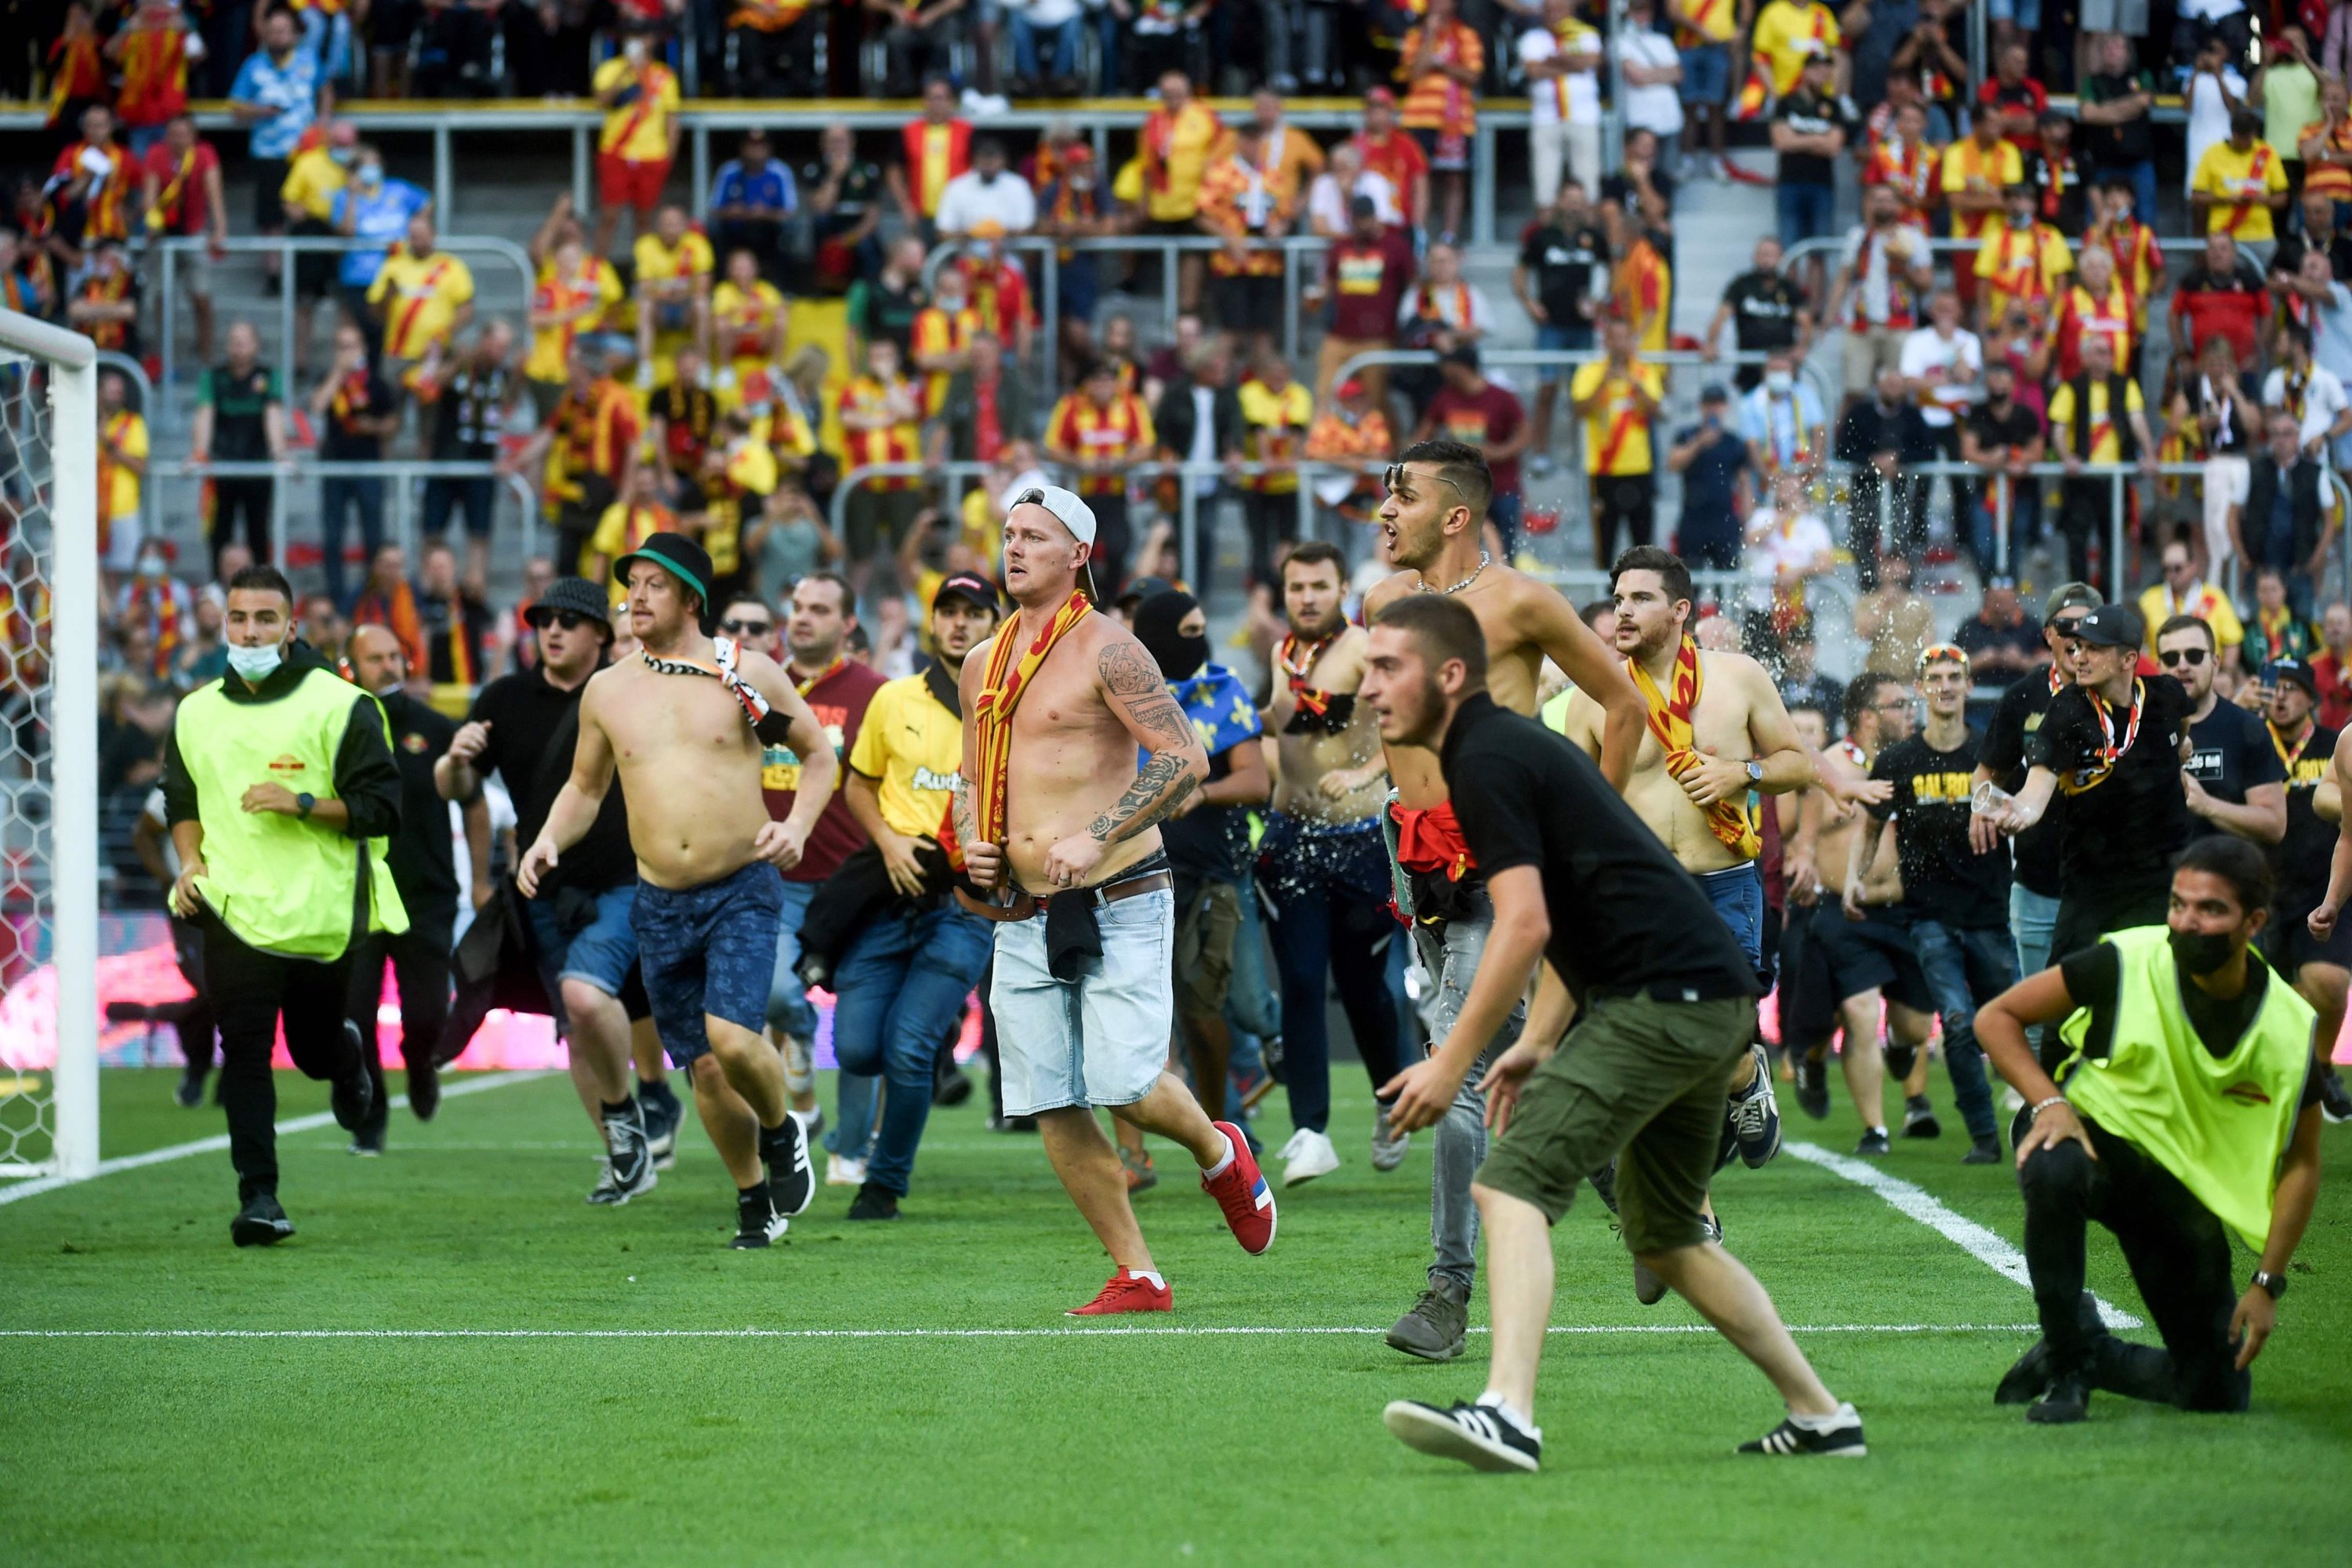 Lens supporters invade the pitch during the French Ligue 1 match against Lille at the Stade Bollaert-Delelis in Lens, France, Sept. 18, 2021. (AFP Photo)